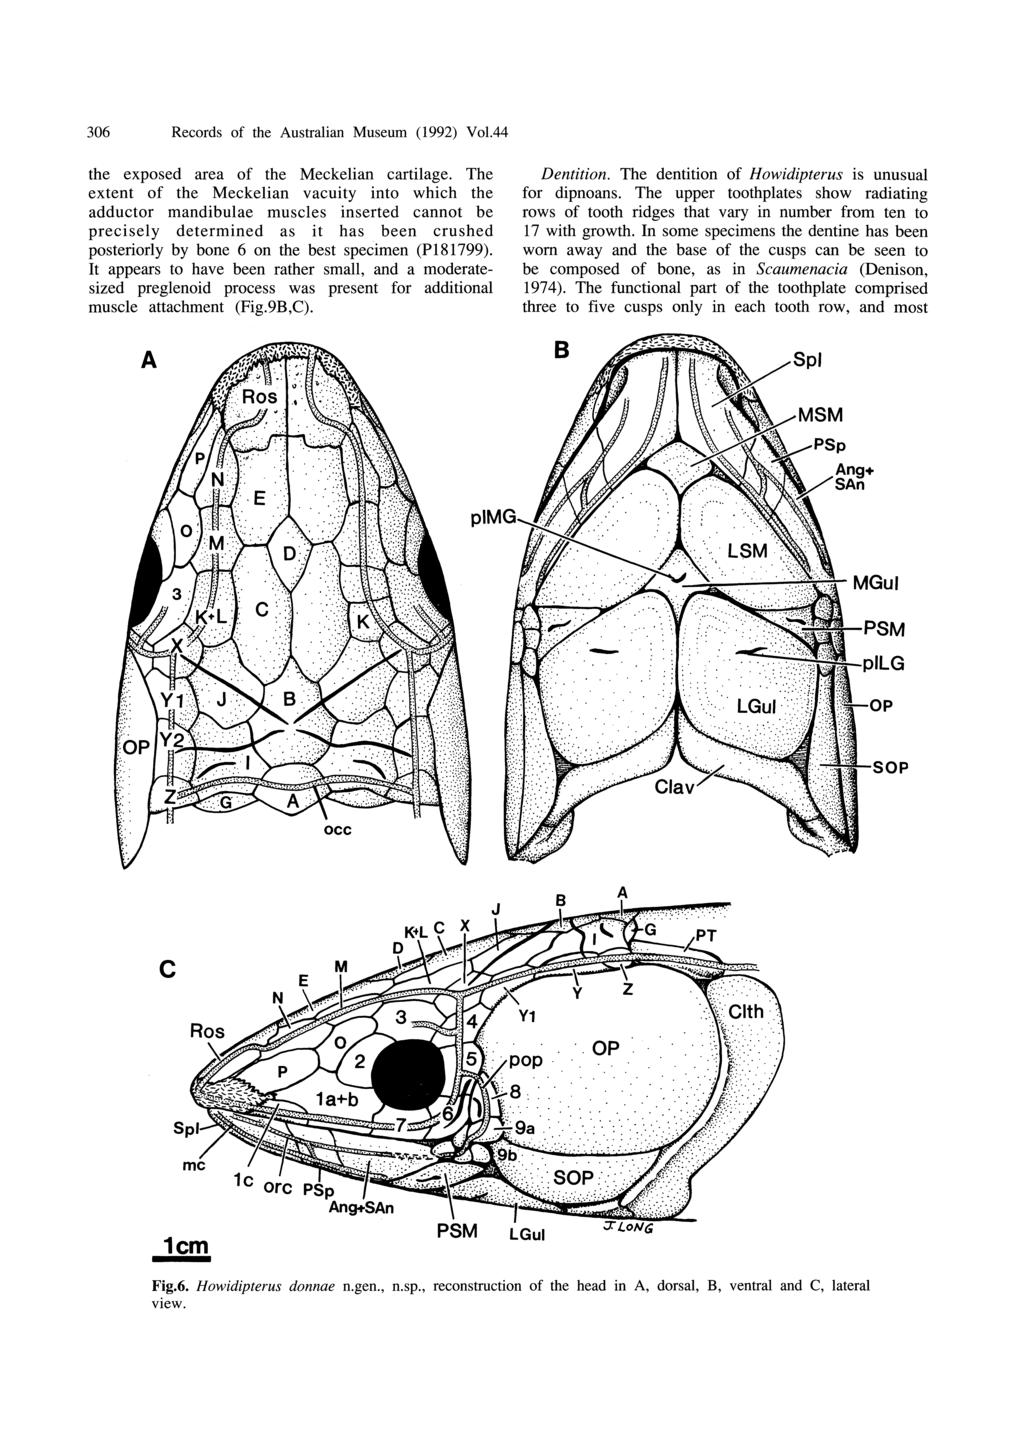 306 Records of the Australian Museum (1992) Vo1.44 the exposed area of the Meckelian cartilage.